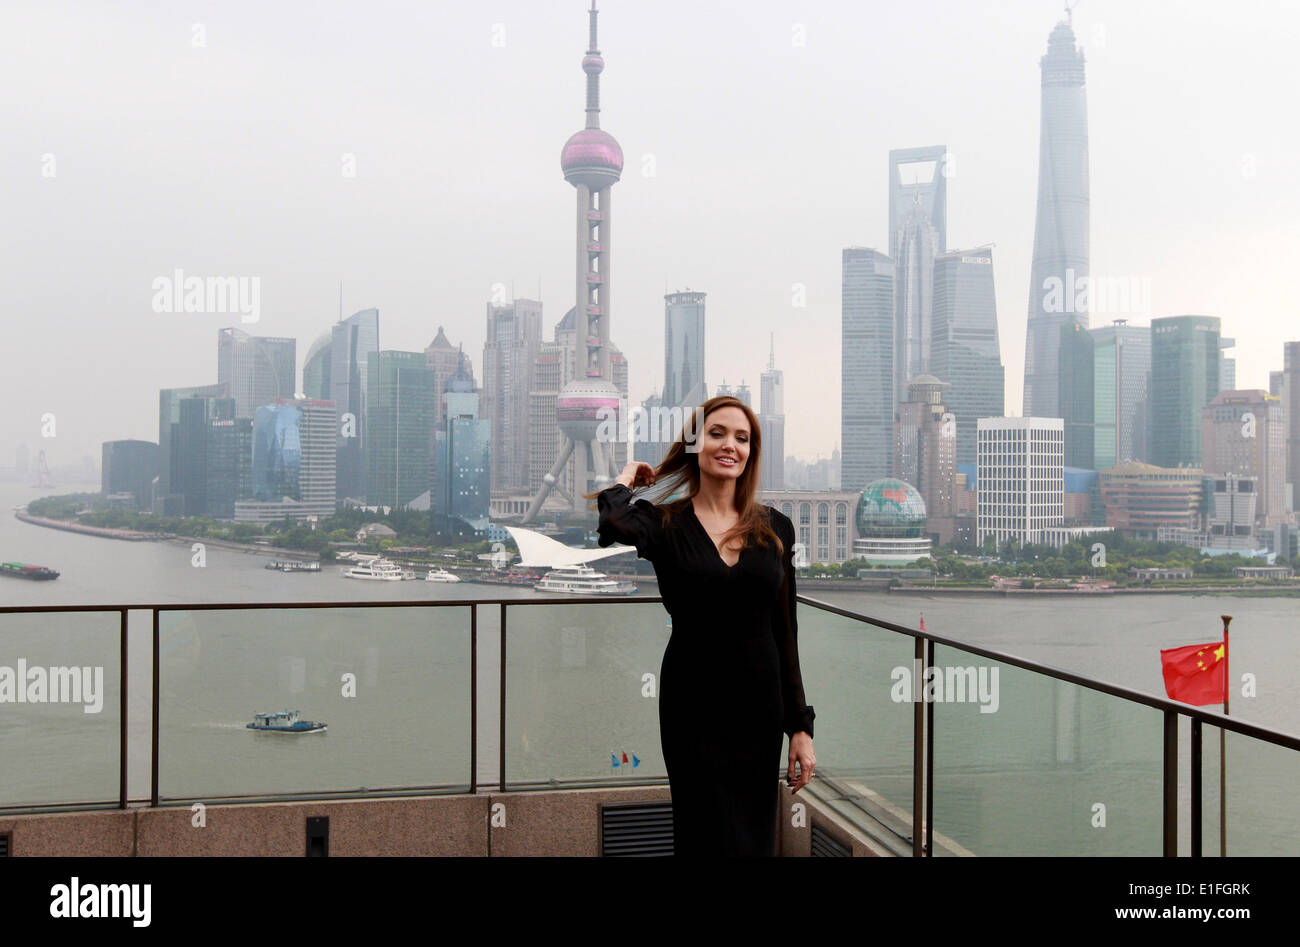 Shanghai, China. 3rd June, 2014. American actress Angelina Jolie meets the media on the Bund in east China's Shanghai, June 3, 2014. Angelina Jolie will promote 'Maleficent', a fantasy adventure film she starred in, during her Shanghai visit, which is also her first time to the Chinese mainland. 'Maleficent' will be debuted in the Chinese mainland on June 20. Credit:  Ren Long/Xinhua/Alamy Live News Stock Photo